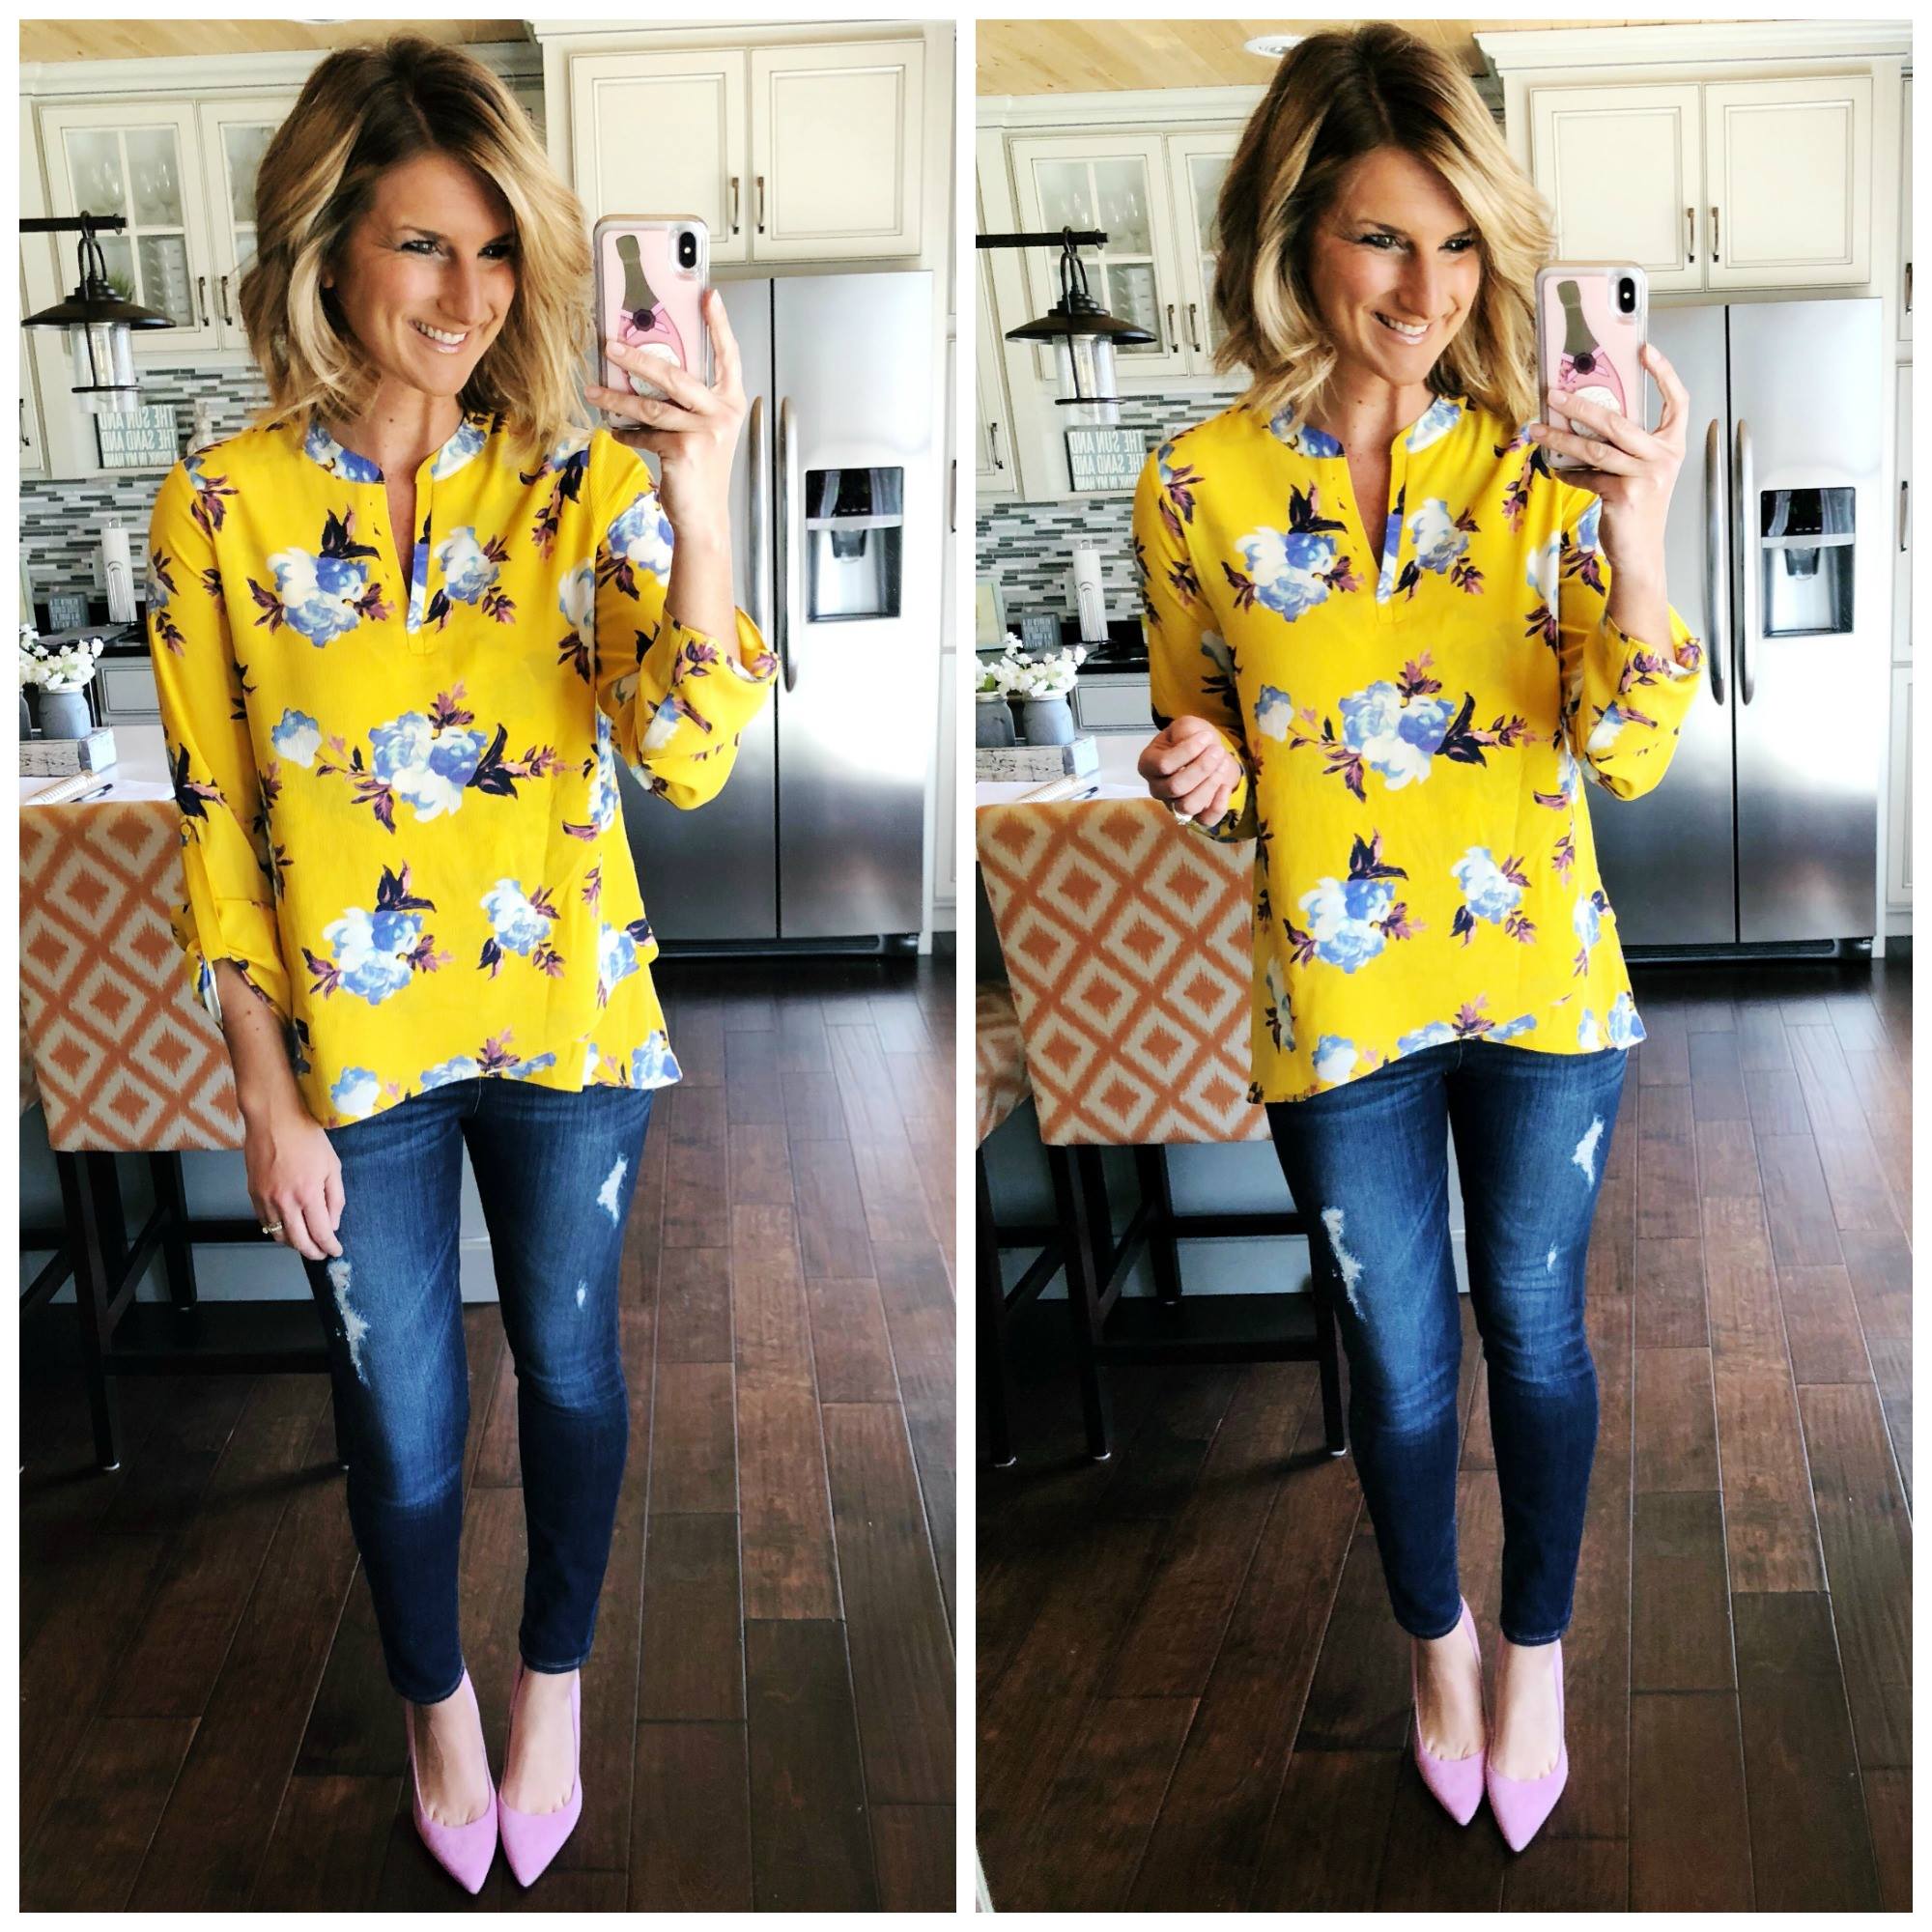 How to Style a Floral Tunic // Spring Fashion // Floral Tunic + Distressed Jeggings + Pumps // Perfect Spring Outfit 